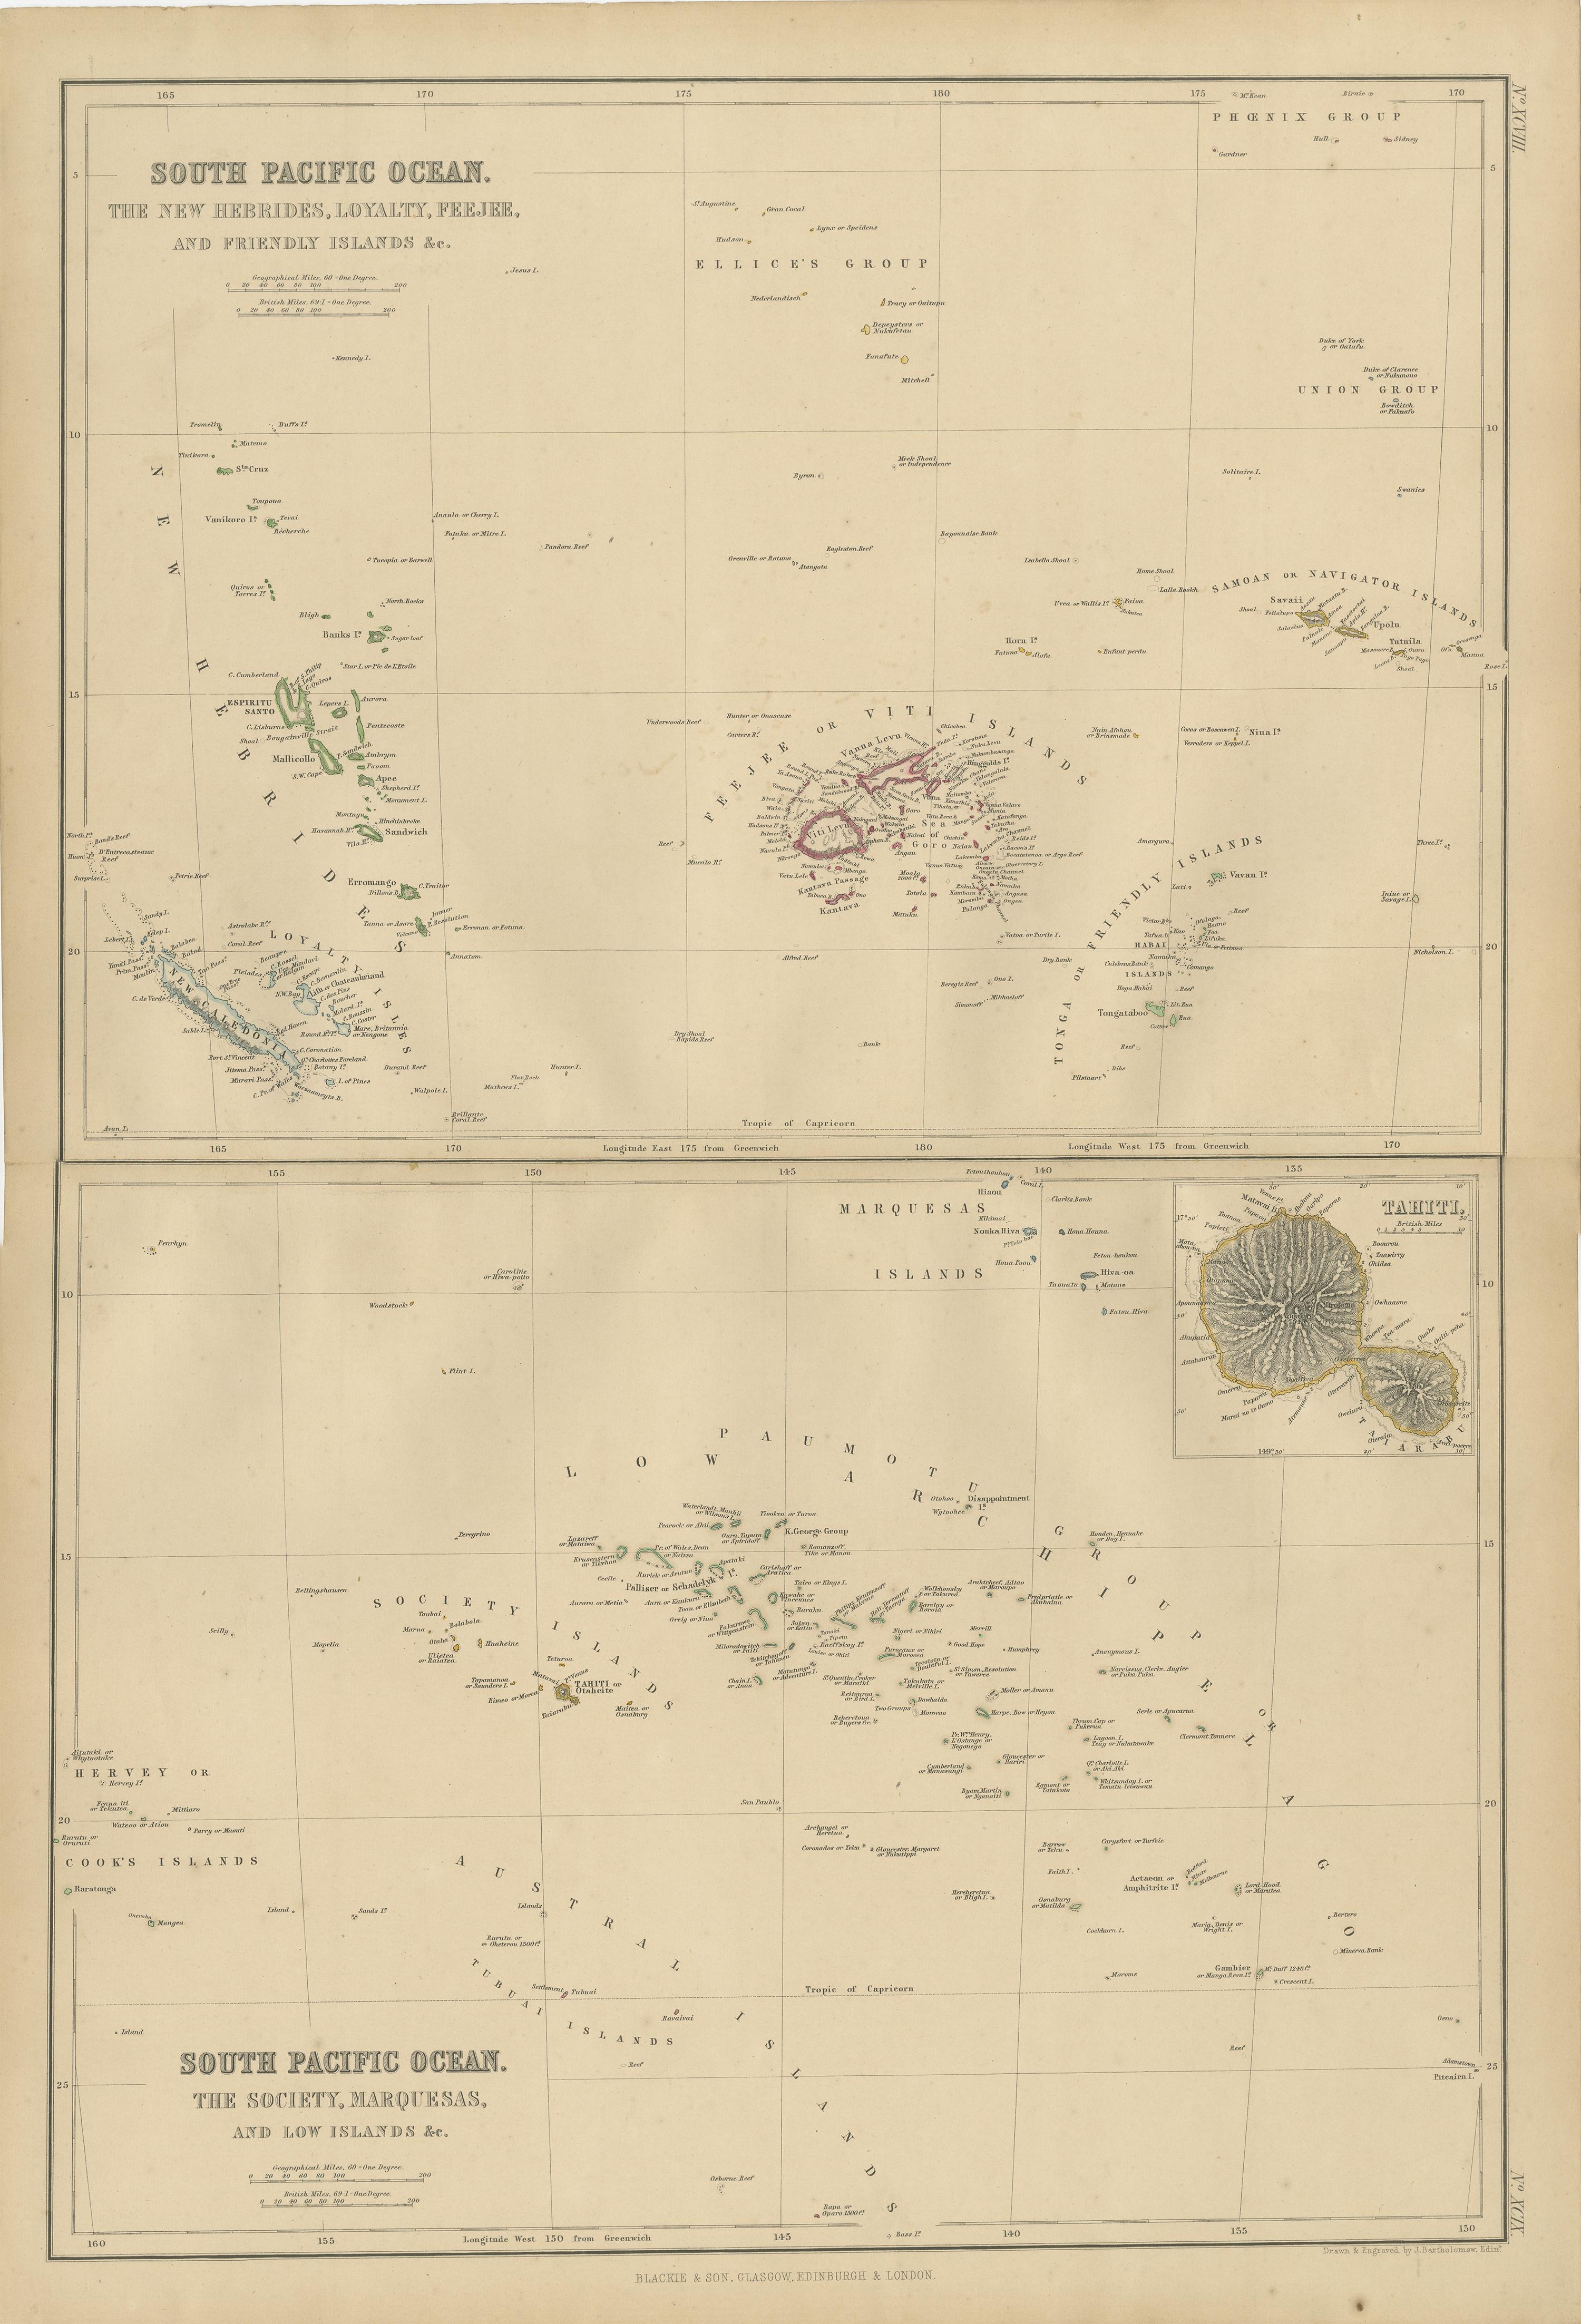 Antique map titled 'South Pacific Ocean'. Original antique map of South Pacific Ocean with inset Map of Tahiti. This map originates from ‘The Imperial Atlas of Modern Geography’. Published by W. G. Blackie, 1859.